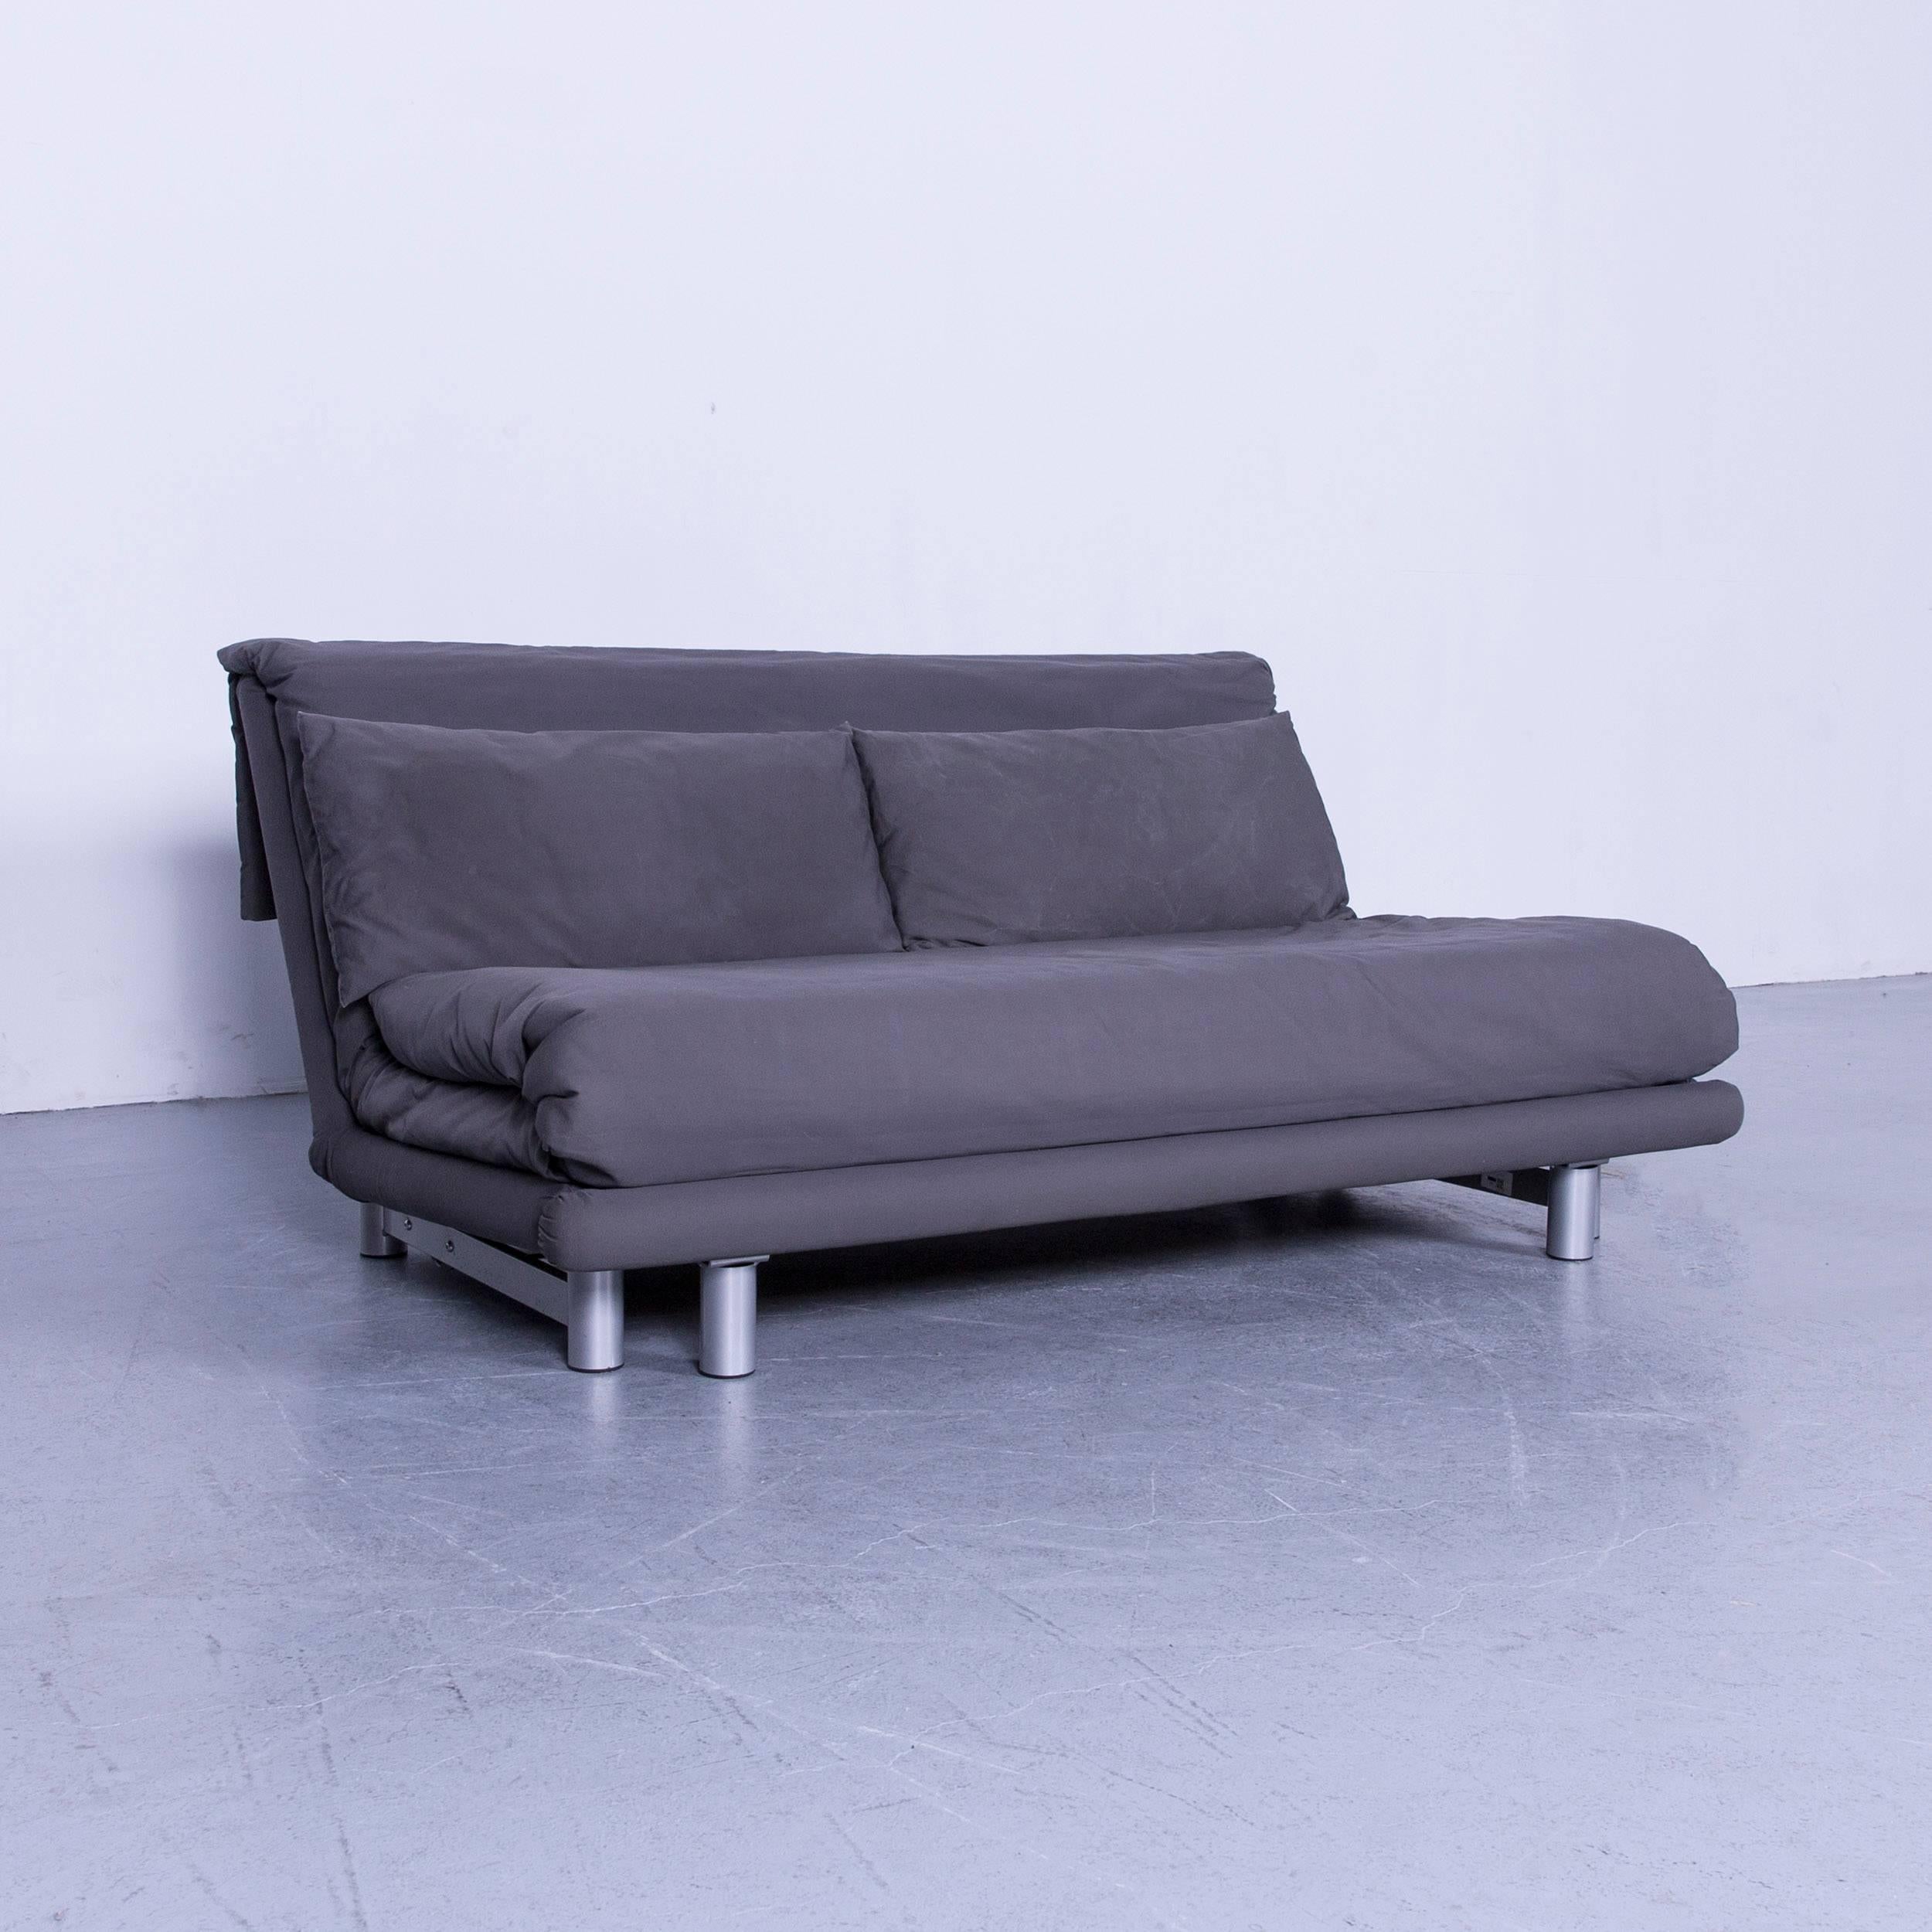 We bring to you an Ligne Roset multi designer fabric bed-sofa grey two-seat.


































 